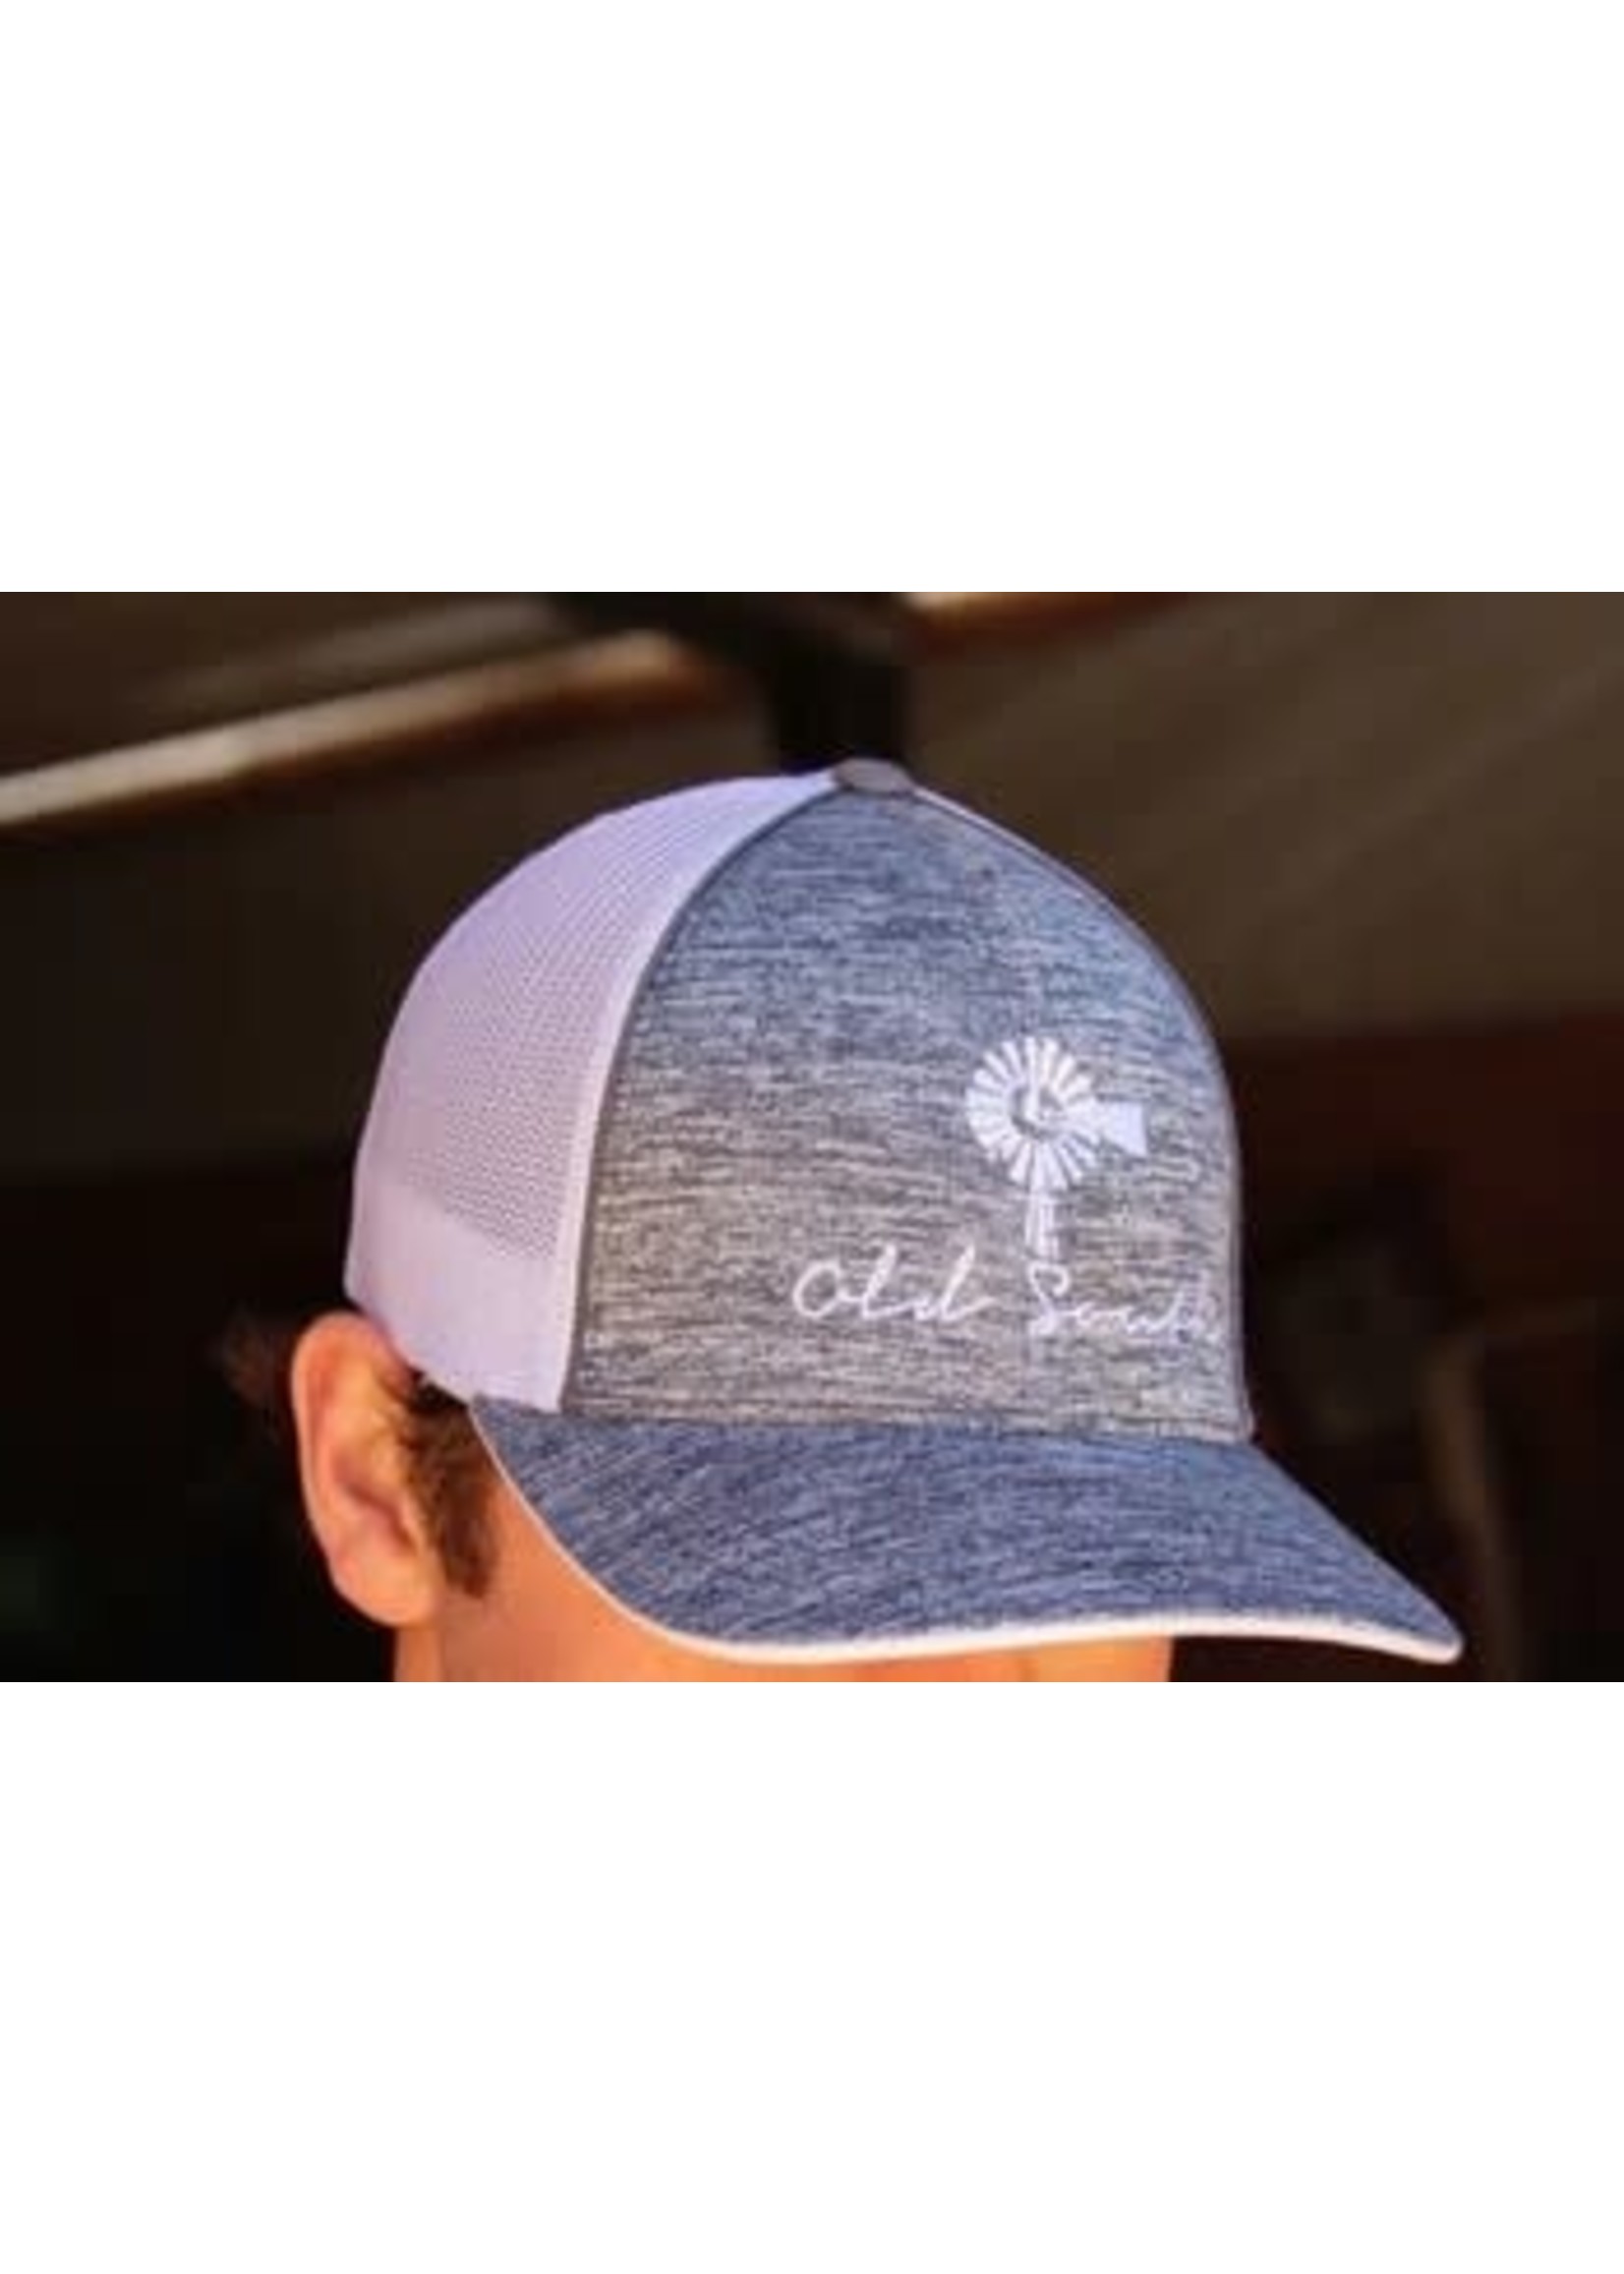 Old South Old South Trucker Hat Flexfit